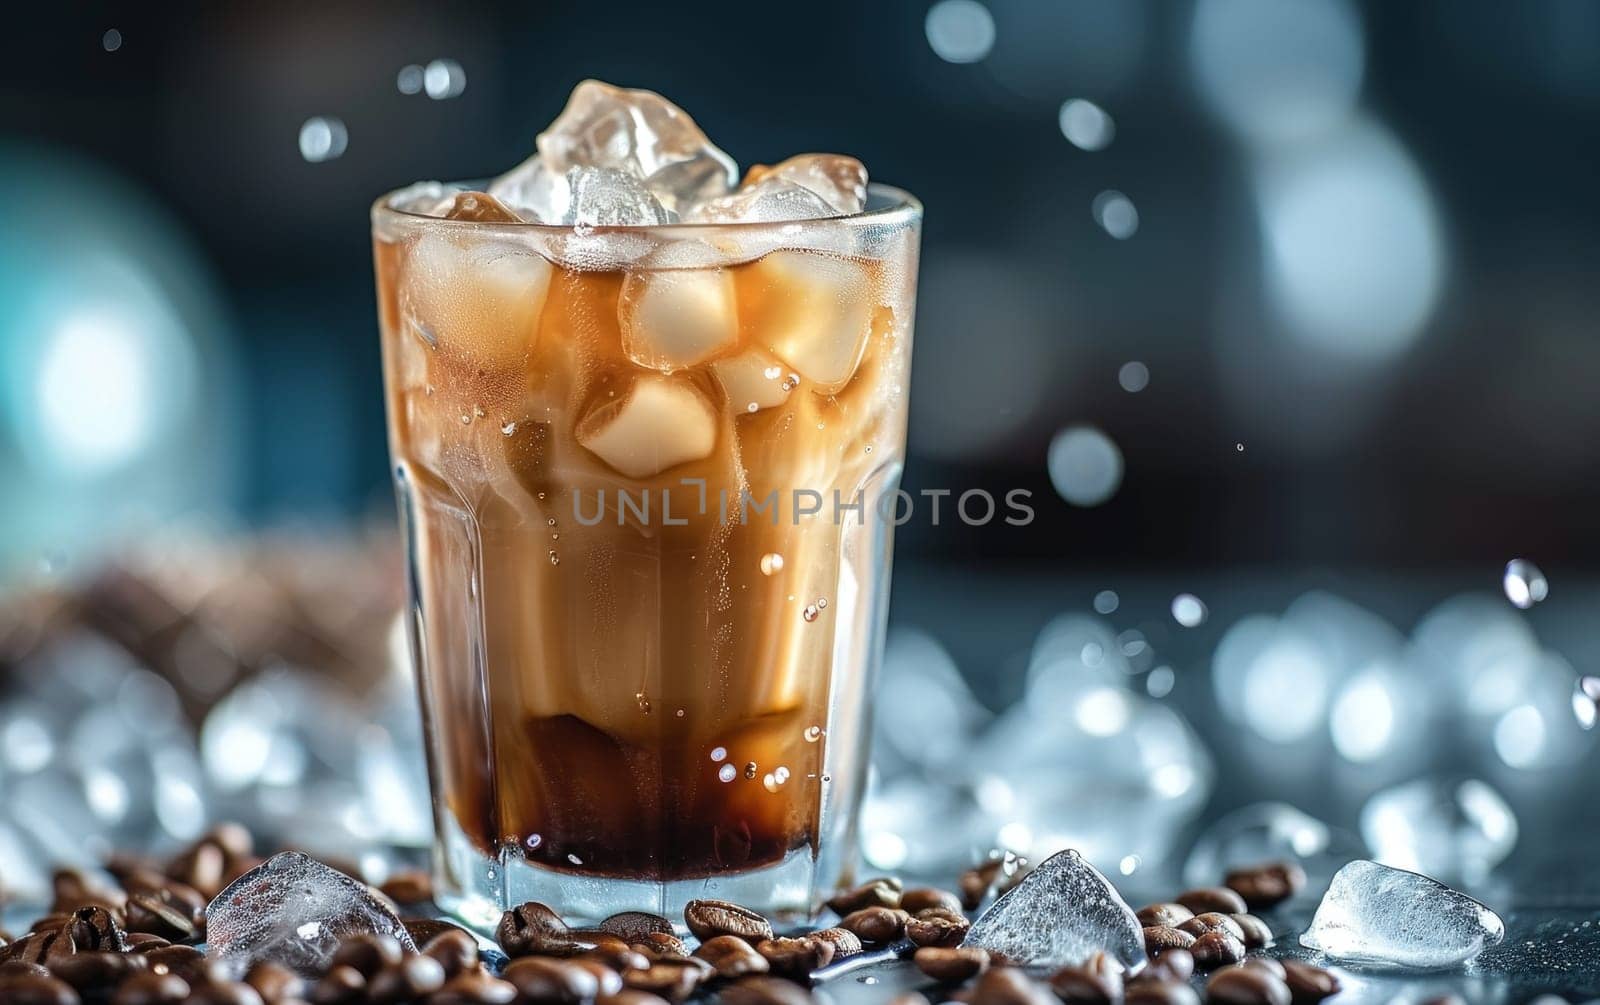 Chilled iced coffee in a clear glass amidst scattered coffee beans and ice cubes. Cold Brew - summer drinks